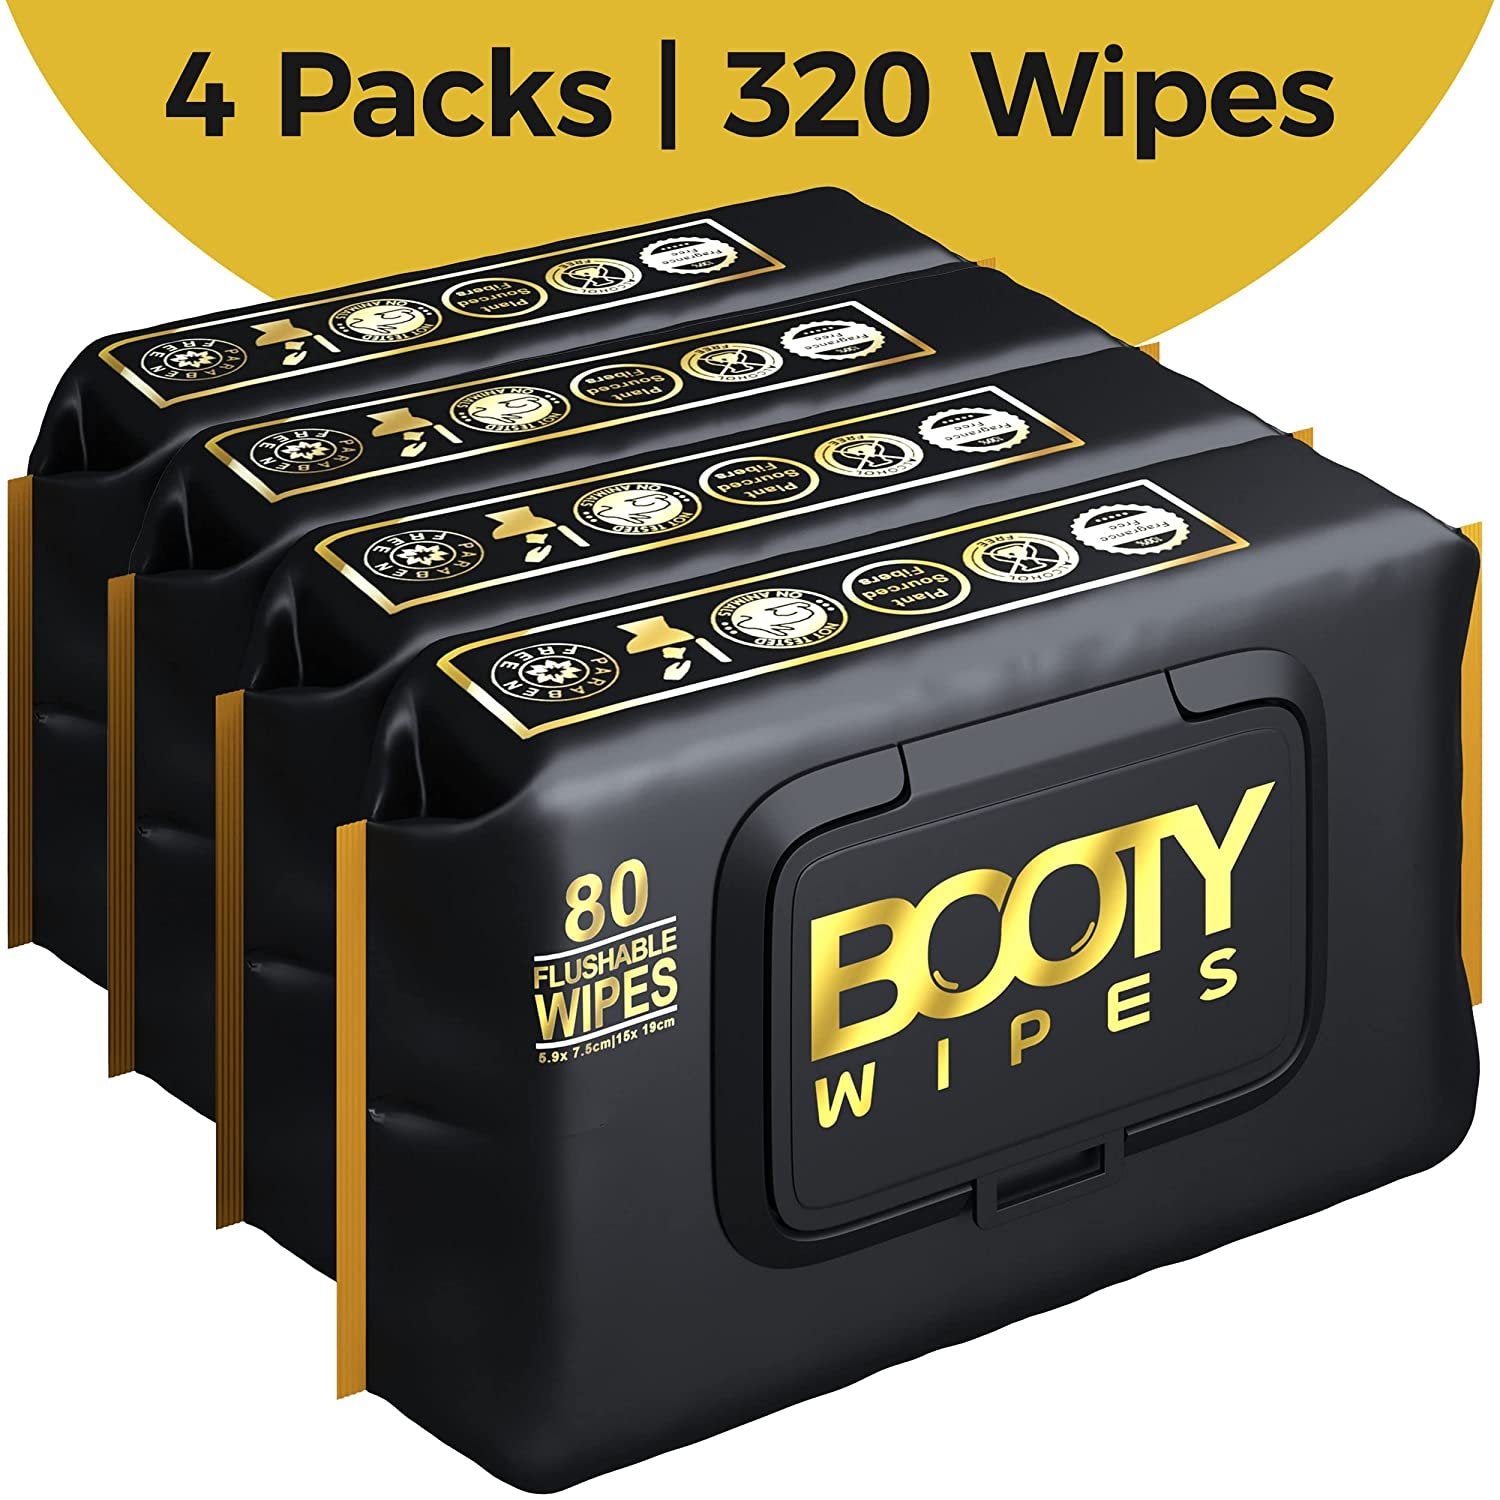 Booty Wipes for Men - 320 Flushable Wet Wipes, pH Balanced with Vitamin-E & Aloe, 80 Ct x 4 Packs